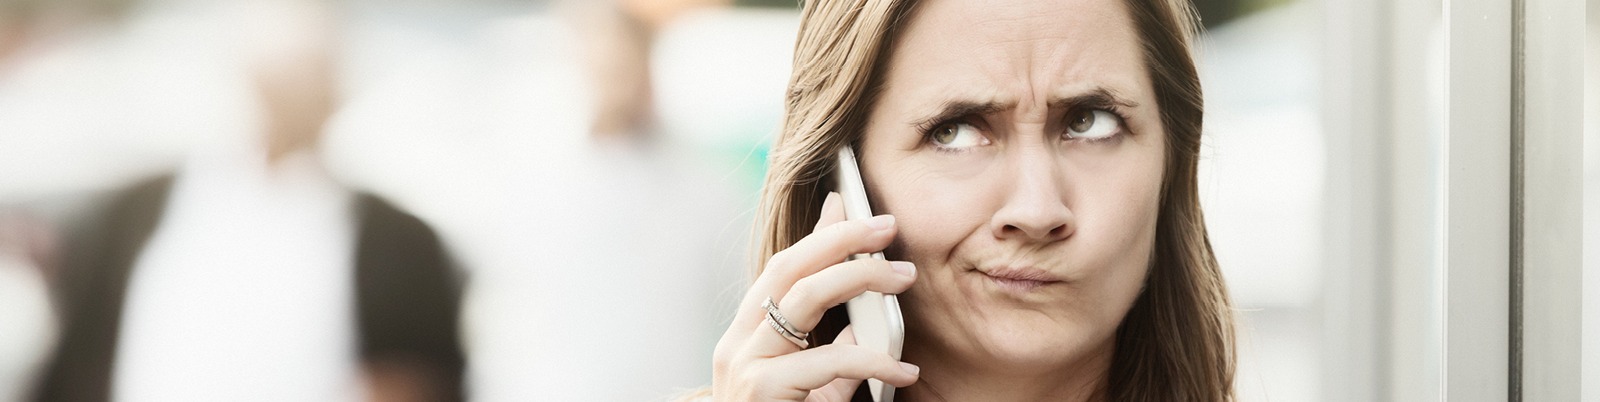 Woman on a cell phone looking suspicious of the call